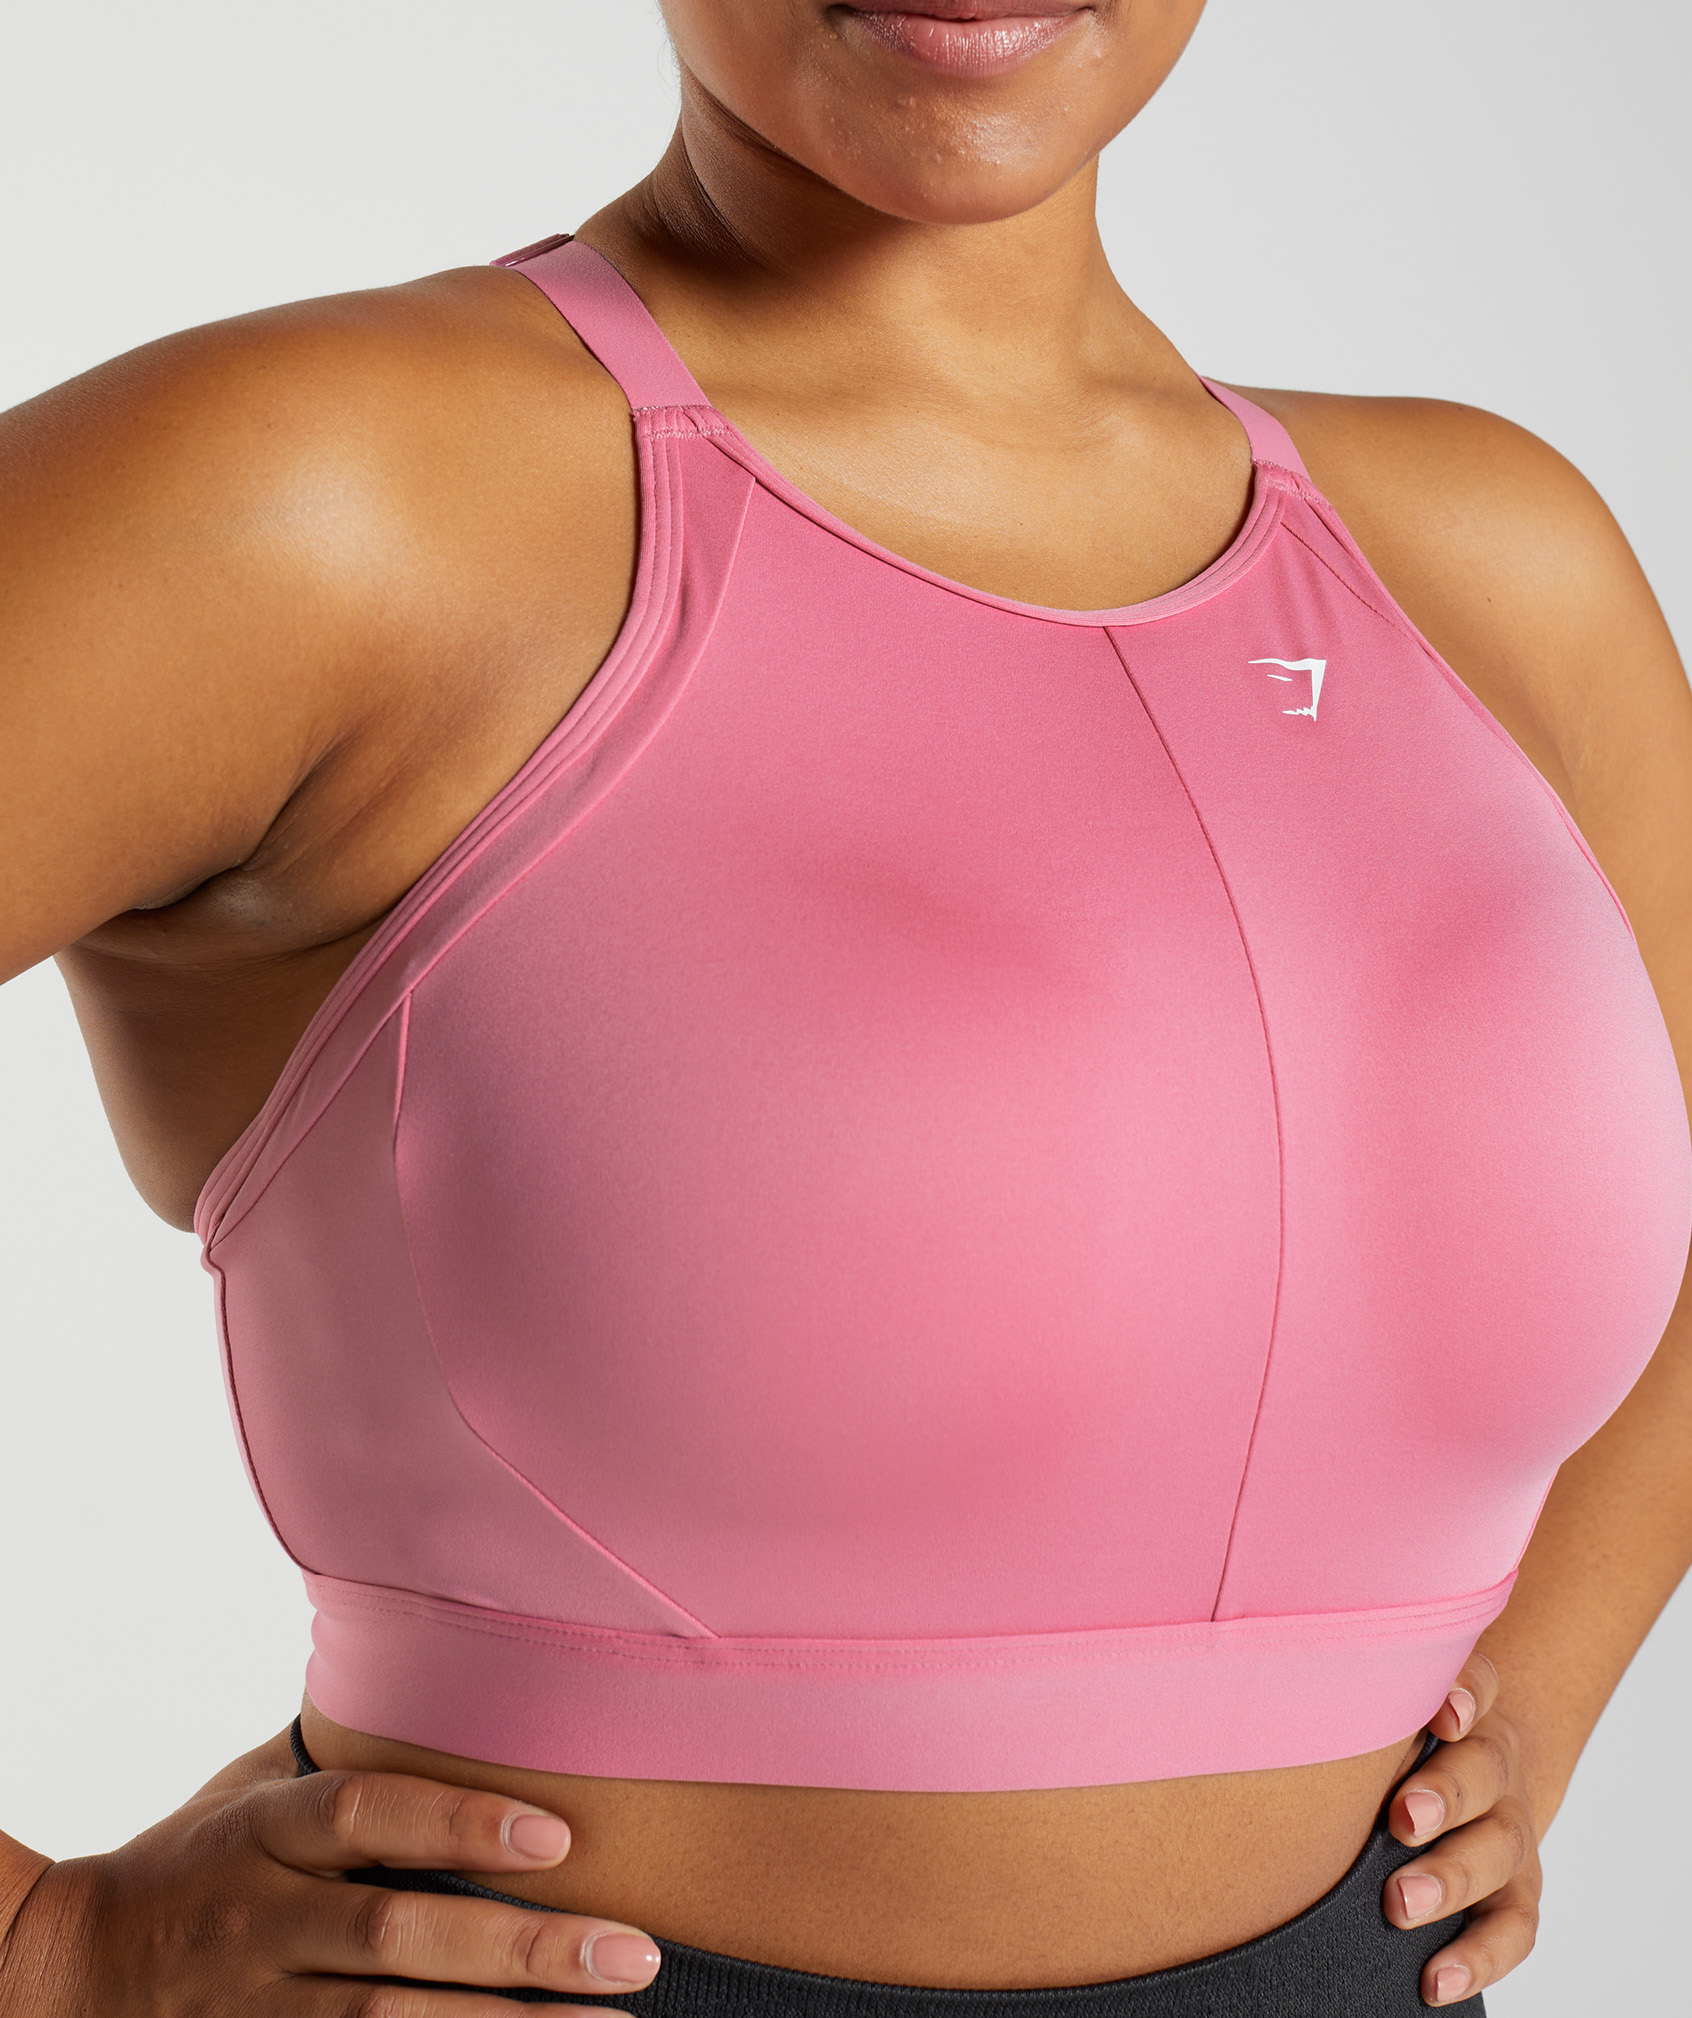 Best Sports Bras: Buying Guide For Chest Support